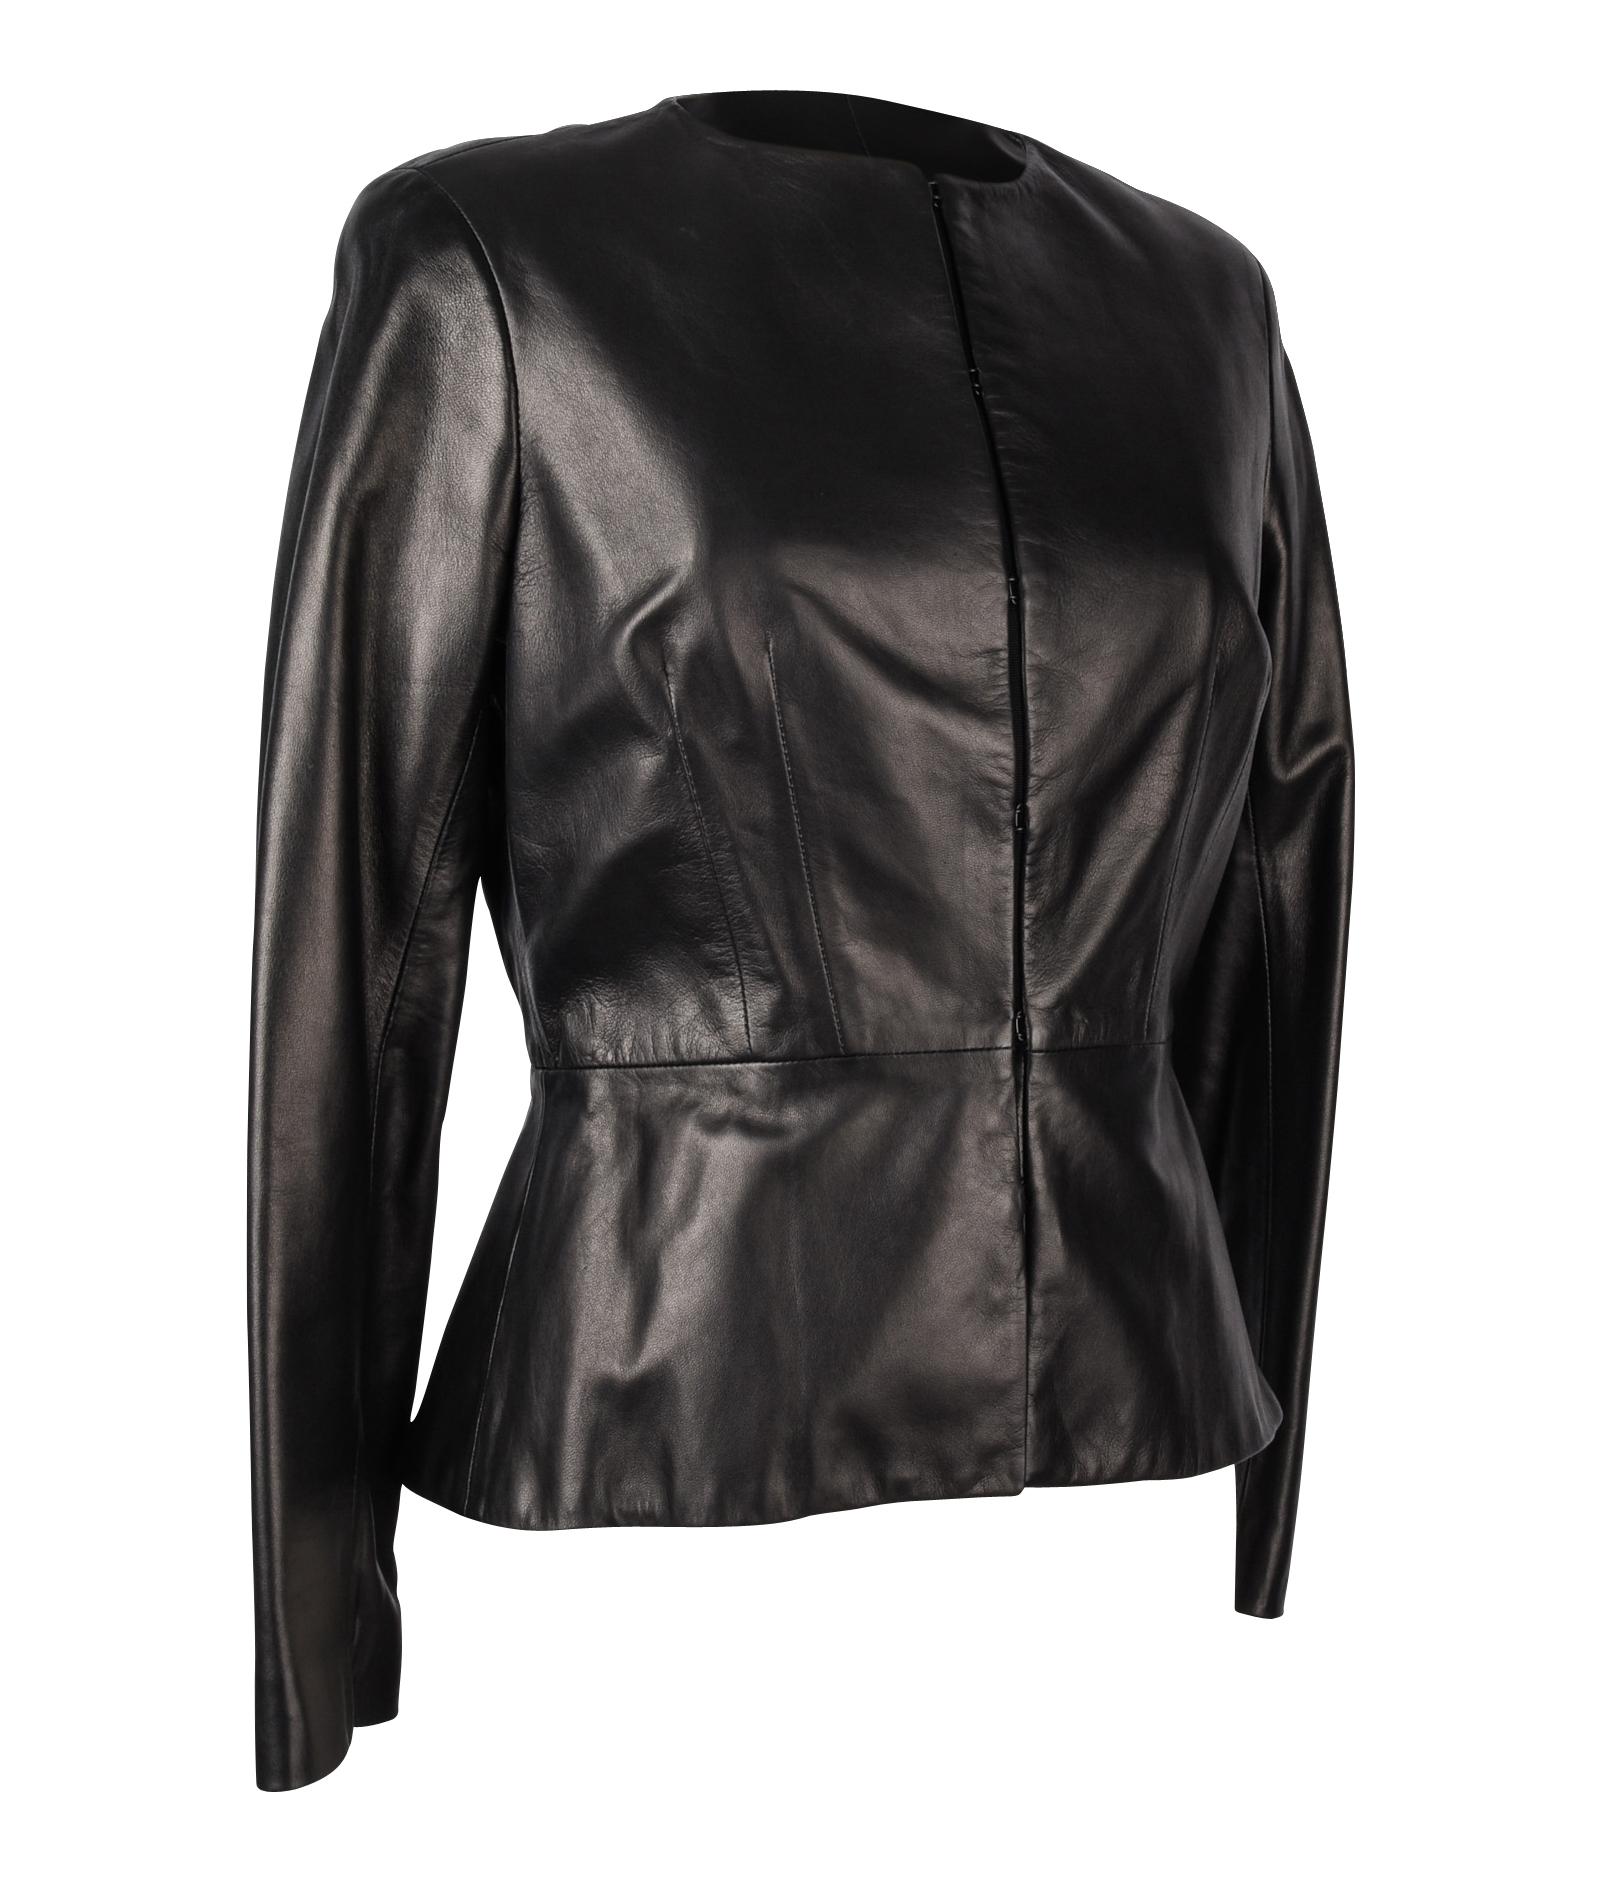 Guaranteed authentic Carolina Herrera black peplum feather light lambskin jacket. 
Subtle peplum. 
Round neck with no collar.
Single breast with hidden hook and closure with Grosgrain placket. 
Classic timeless jacket.
final sale               

USA